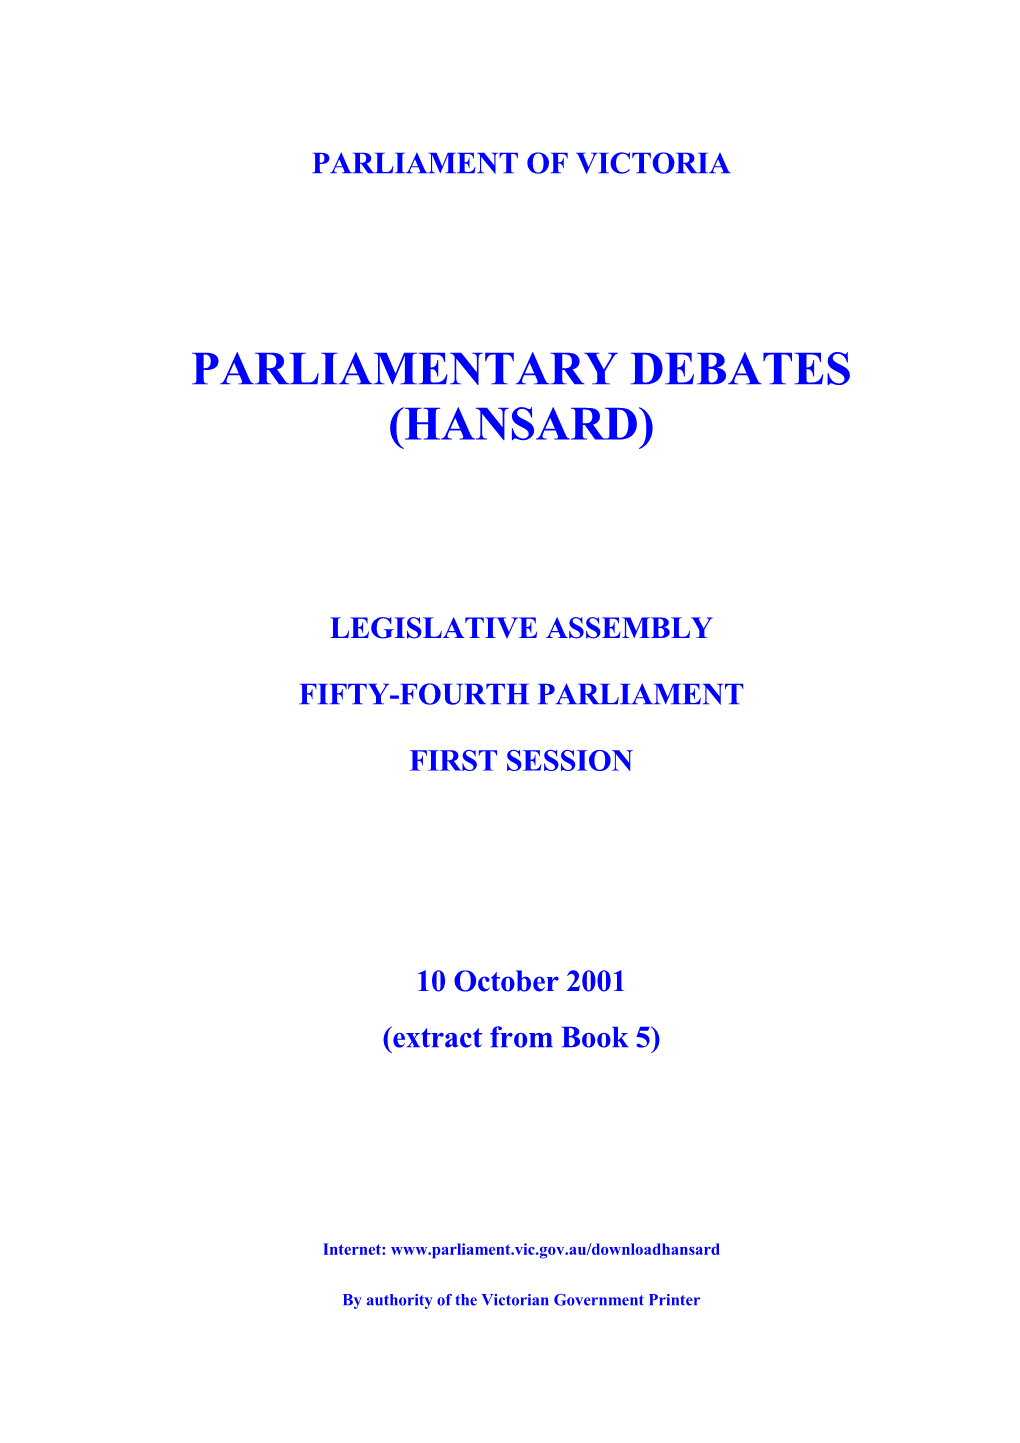 Assembly Parlynet Extract 10 October 2001 from Book 5